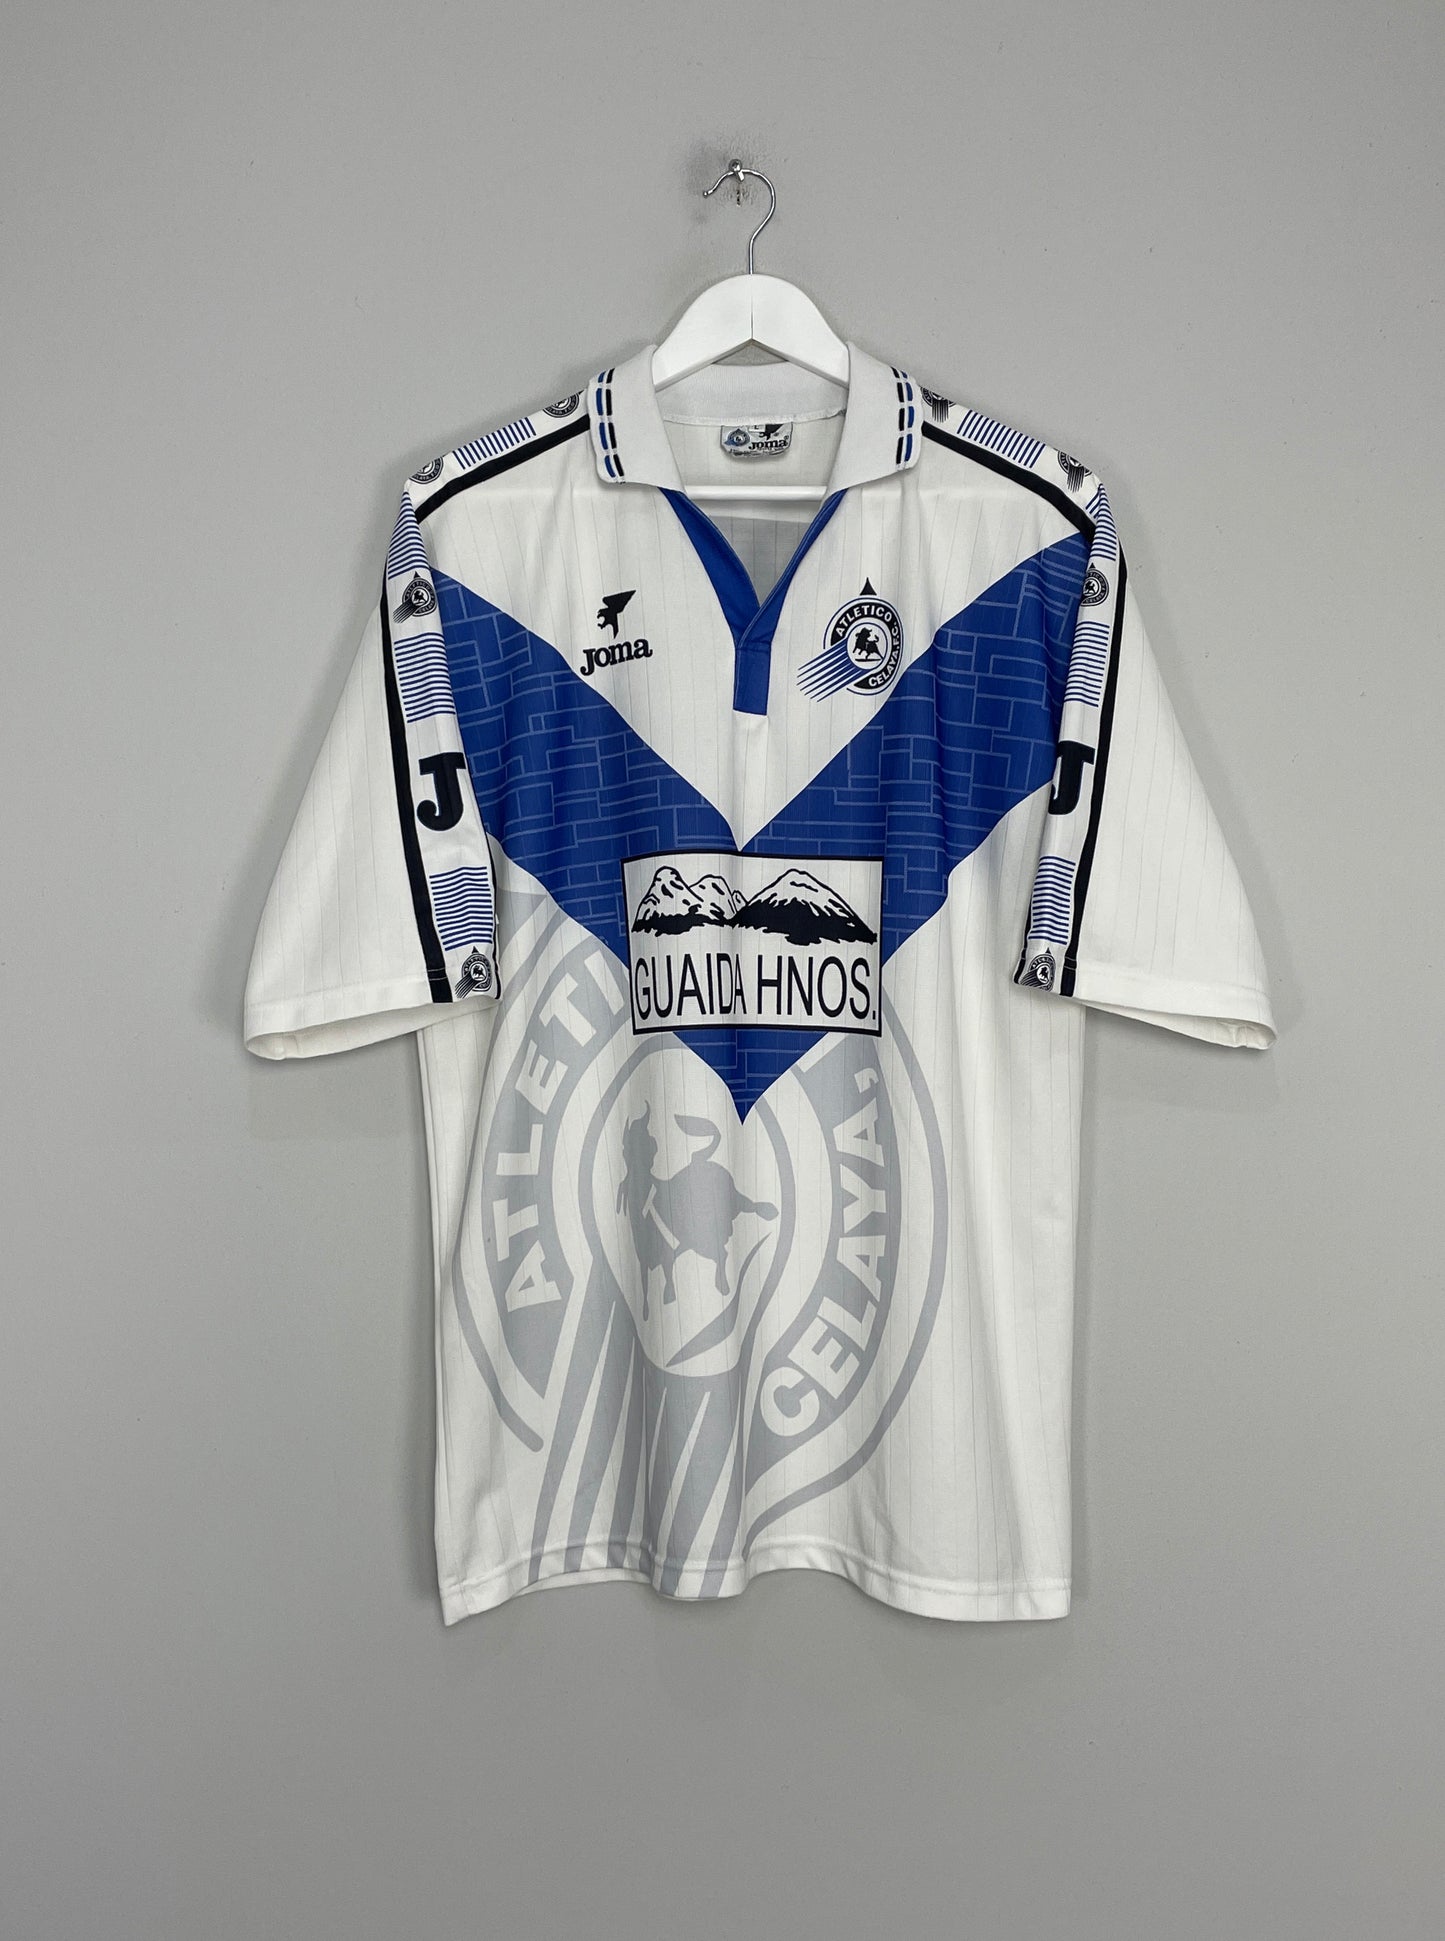 Image of the Atletico Celaya shirt from the 1996/97 season